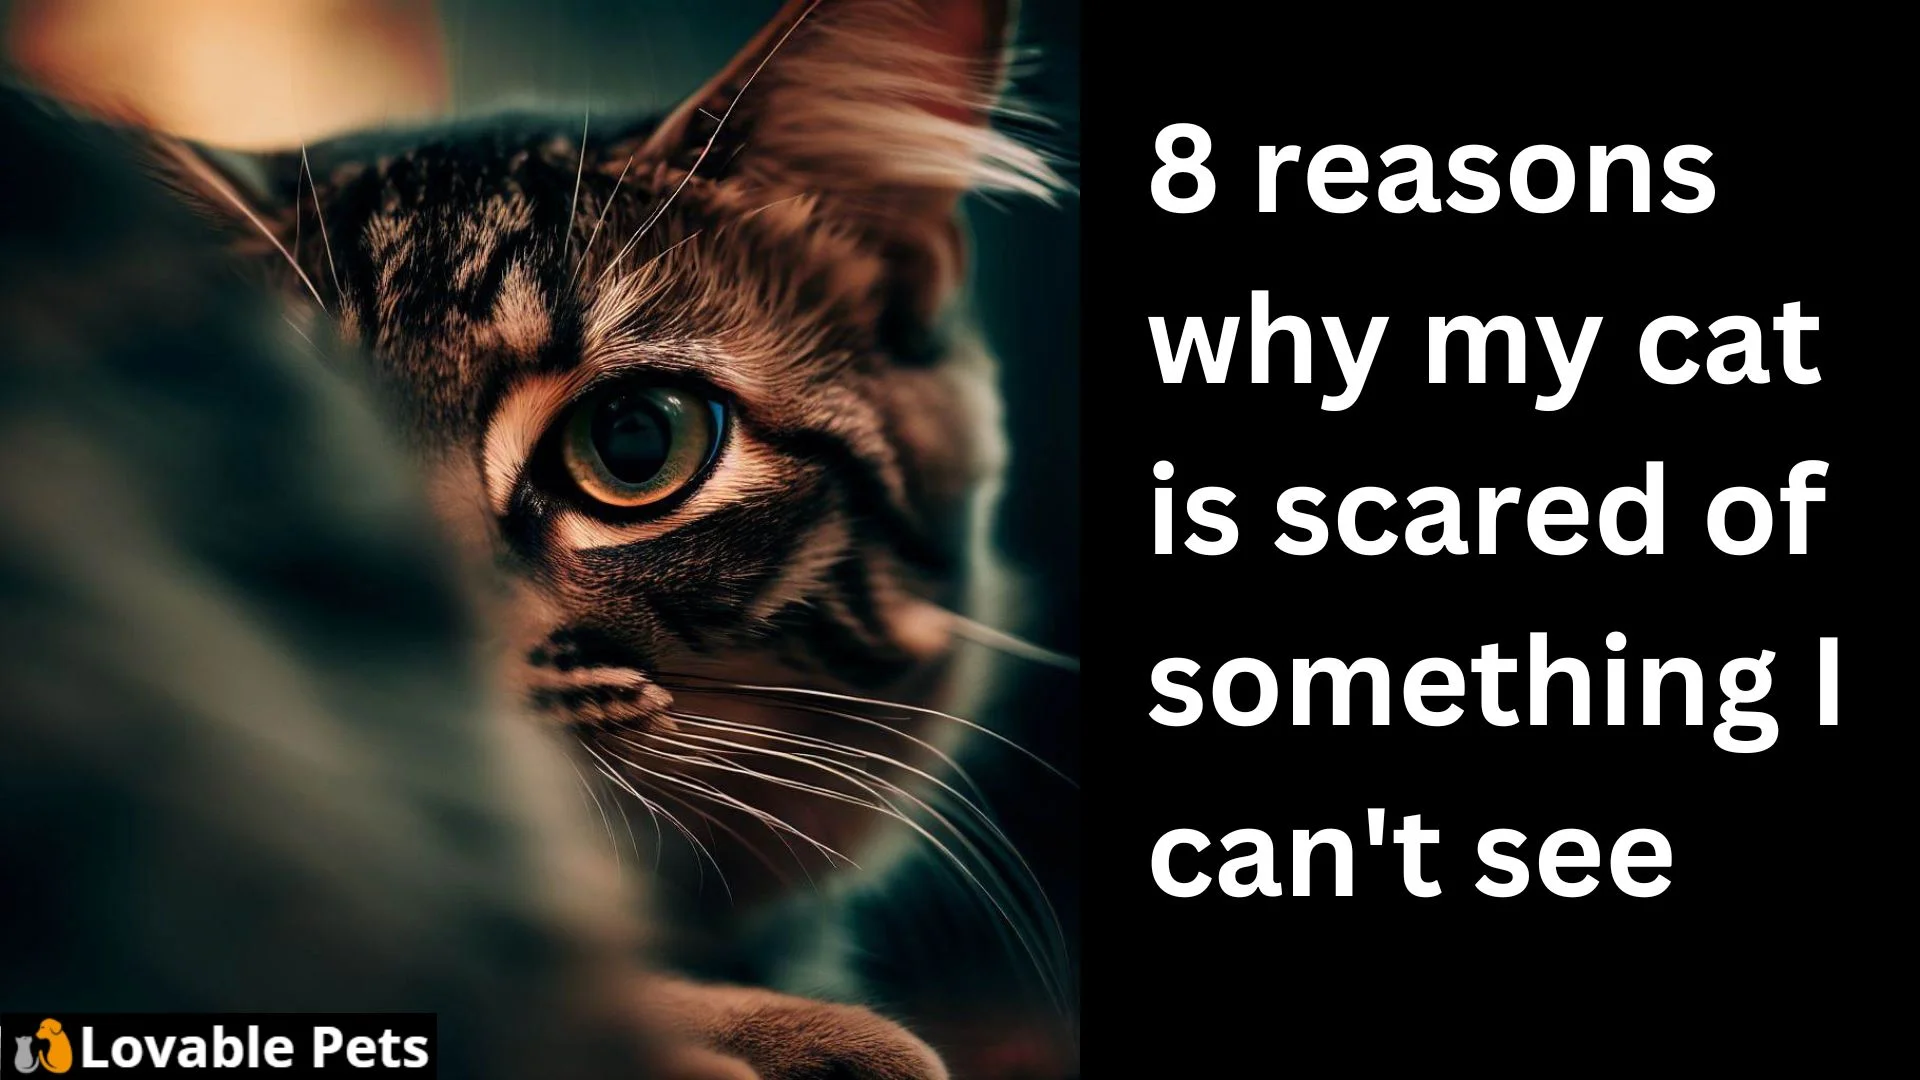 8 reasons why my cat is scared of something i can't see